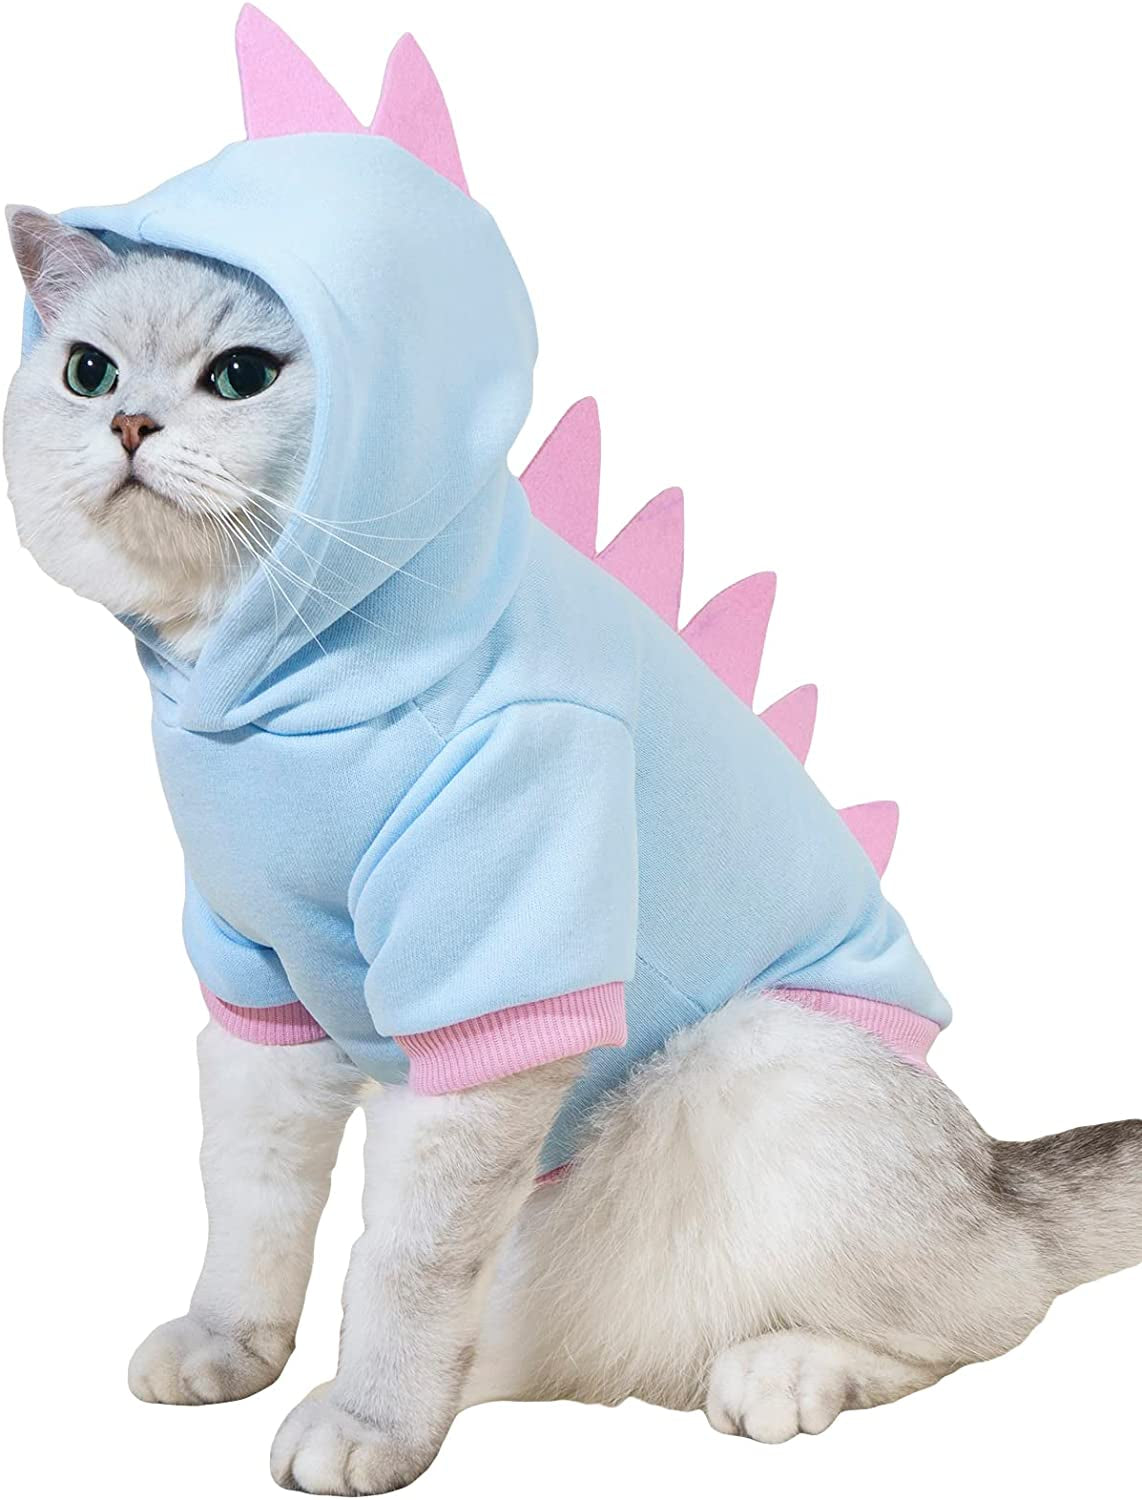 QWINEE Dinosaur Dog Hoodie Dog Warm Jacket Christmas Halloween Dog Costume Dog Clothes for Puppy Kitten Small Medium Dogs Cats Black S Animals & Pet Supplies > Pet Supplies > Dog Supplies > Dog Apparel QWINEE Baby Blue 3X-Large 